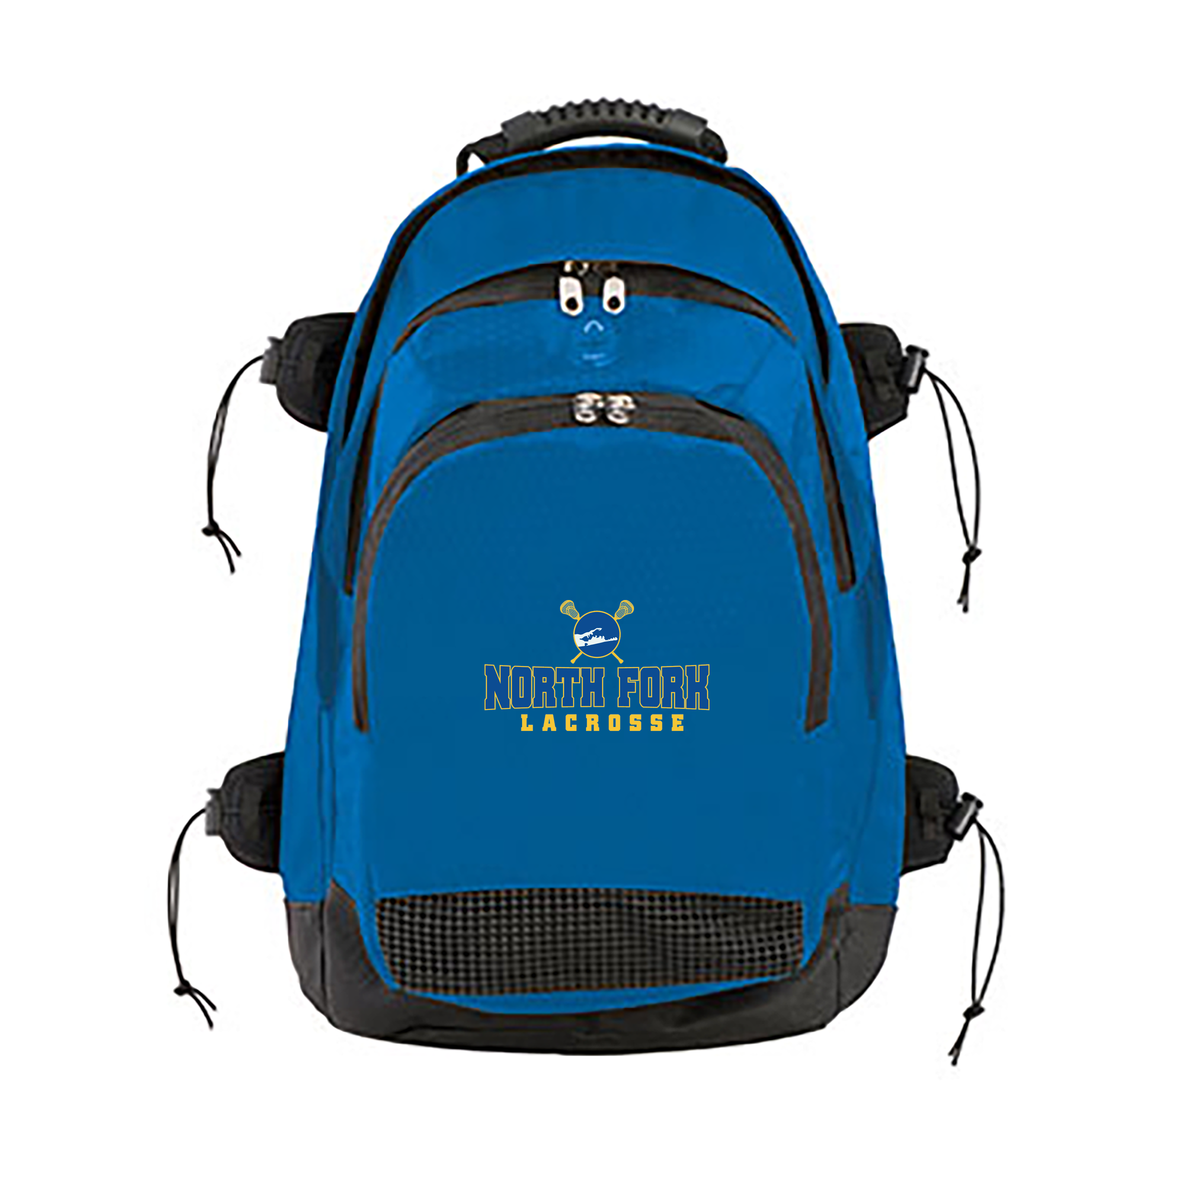 North Fork Lacrosse Deluxe Sports Backpack